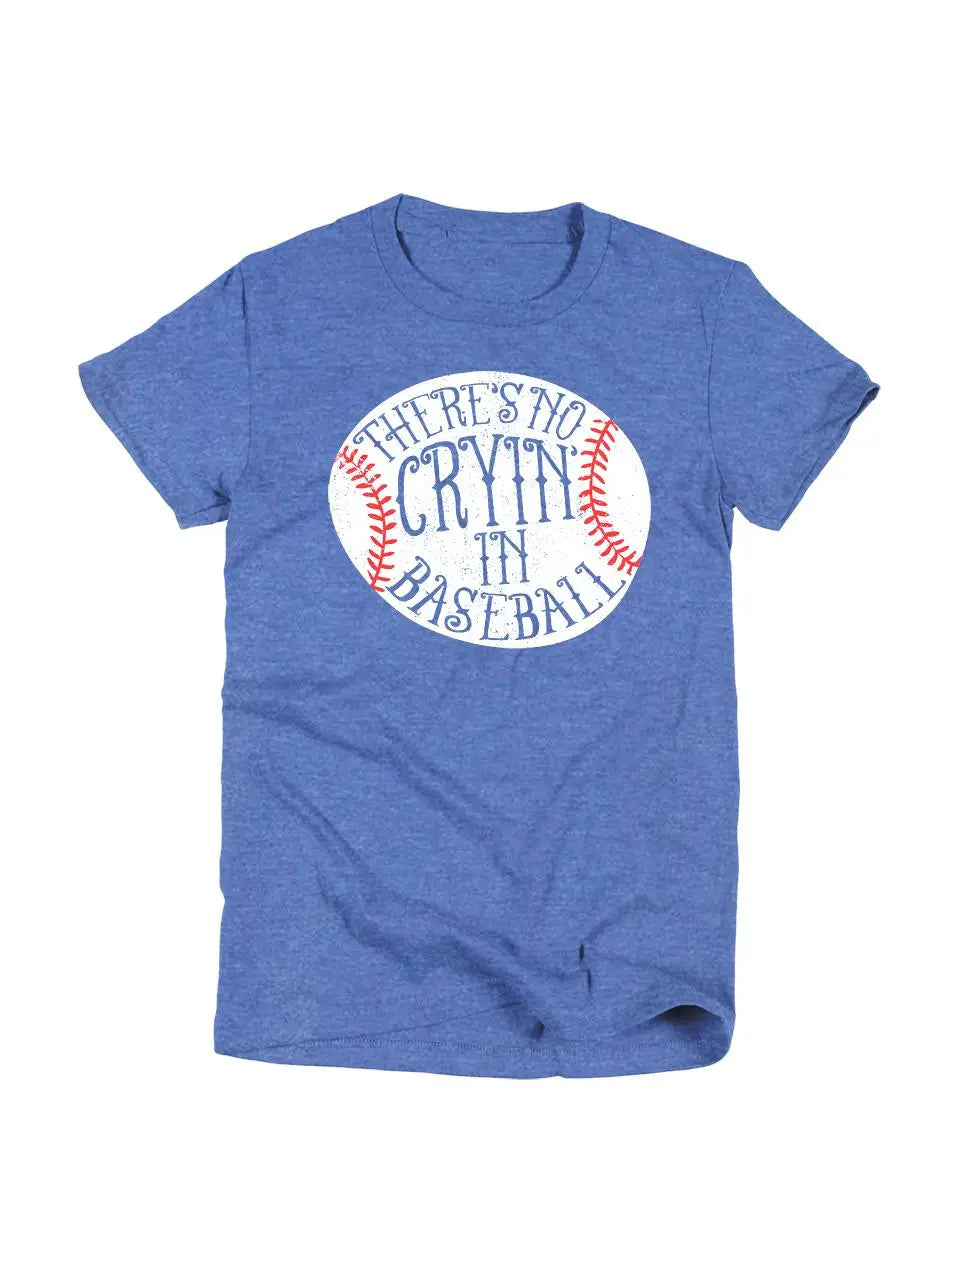 Ruby's Rubbish -  There's No Crying in Baseball T-Shirt